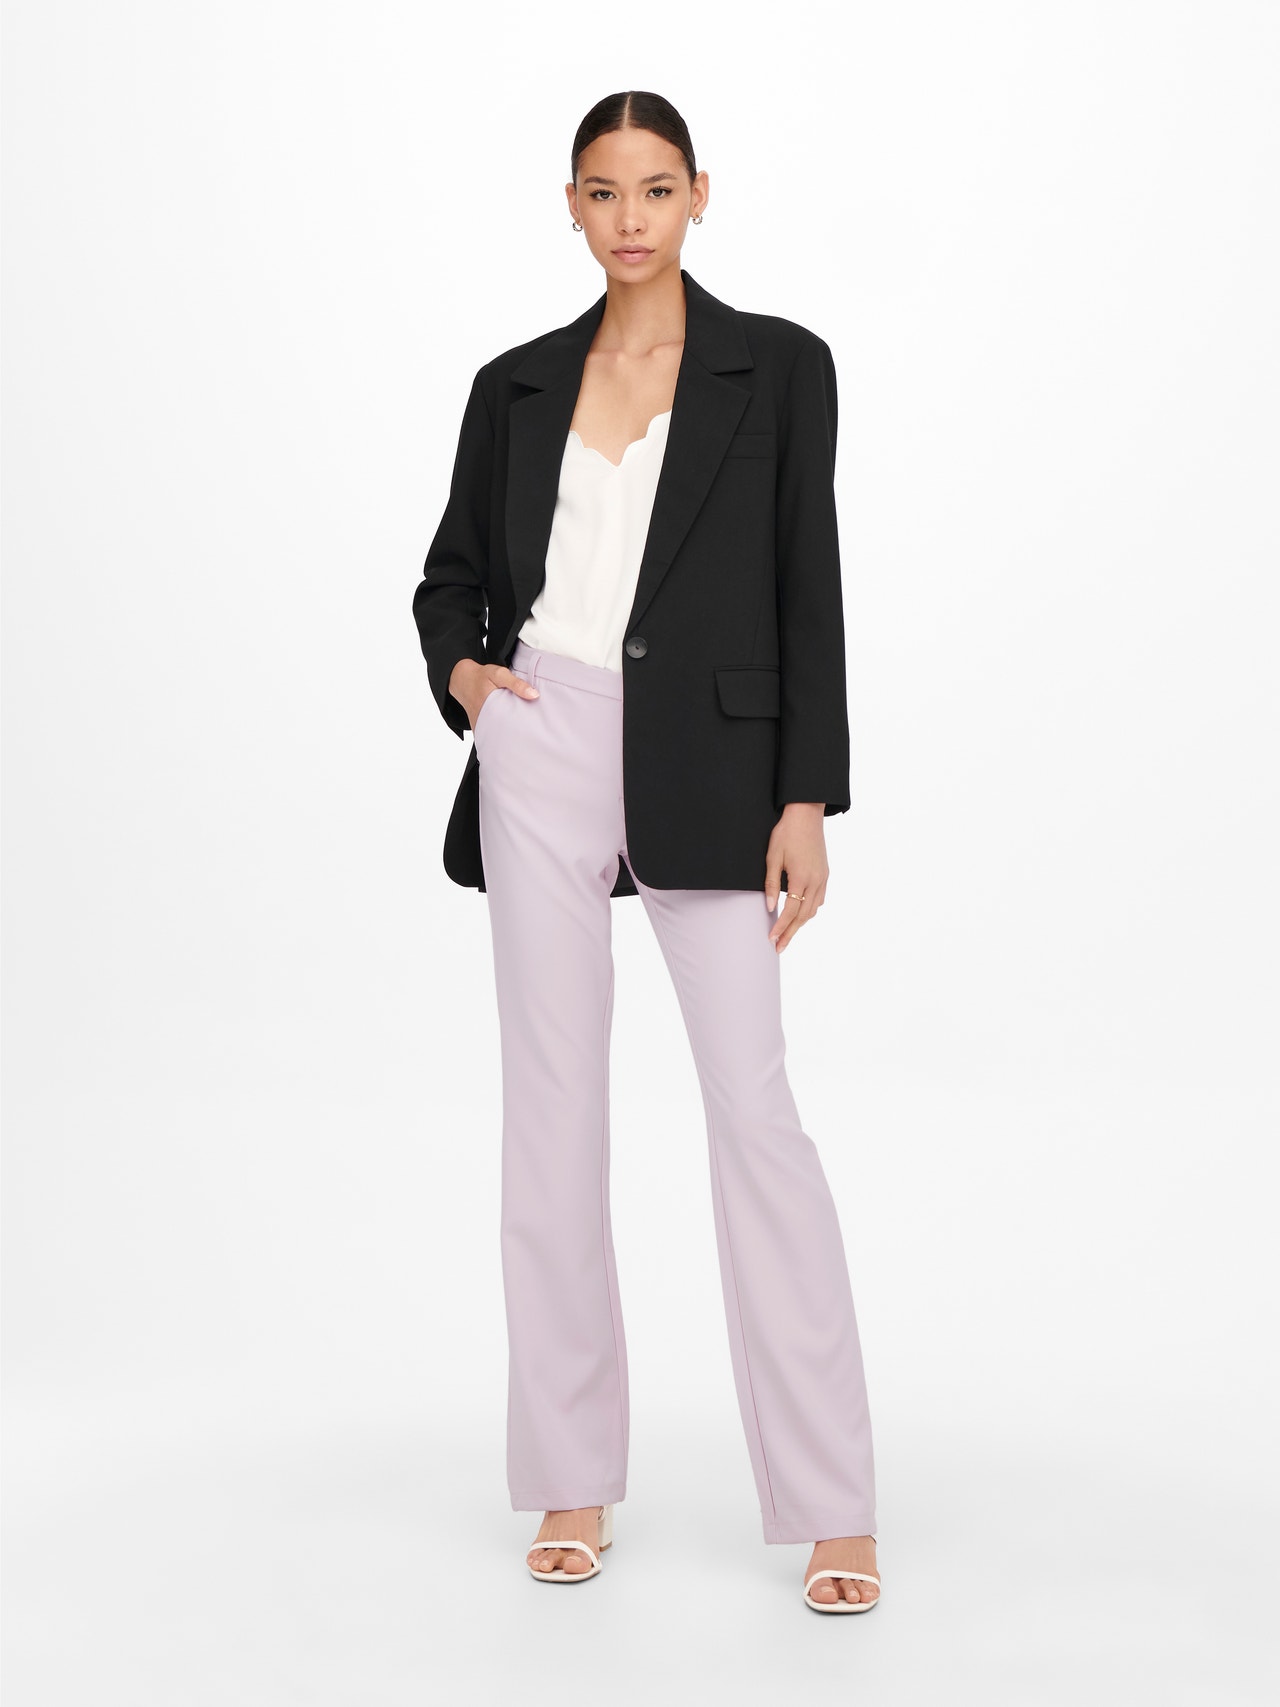 ONLY Acampanados Pantalones -Winsome Orchid - 15245640